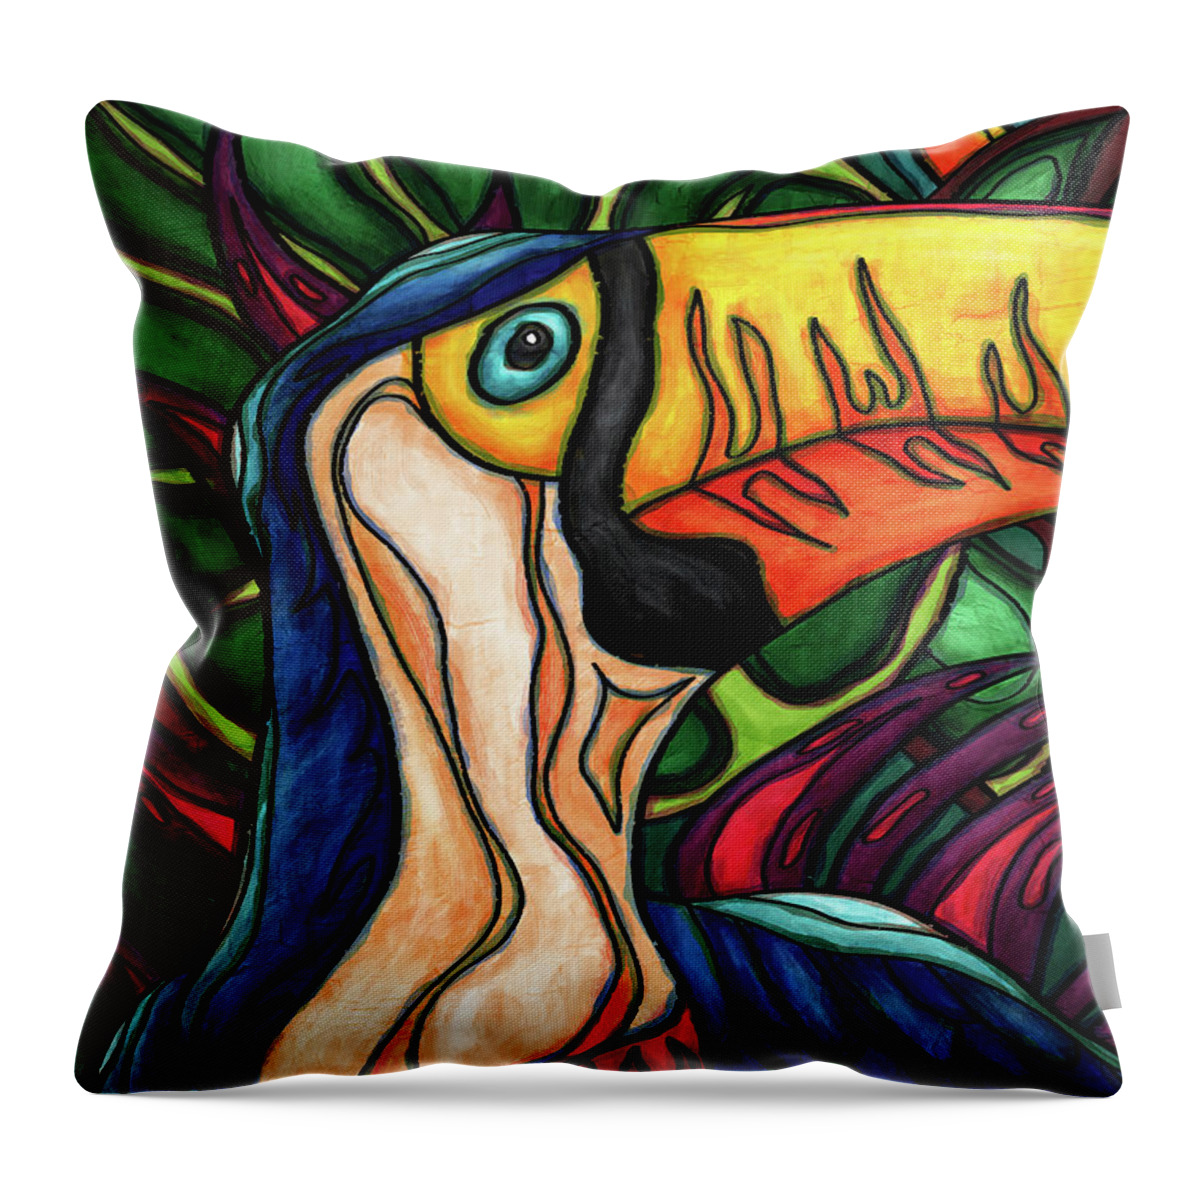 Toco Toucan Throw Pillow featuring the painting Toco toucan in colorful jungle, toucan bird by Nadia CHEVREL